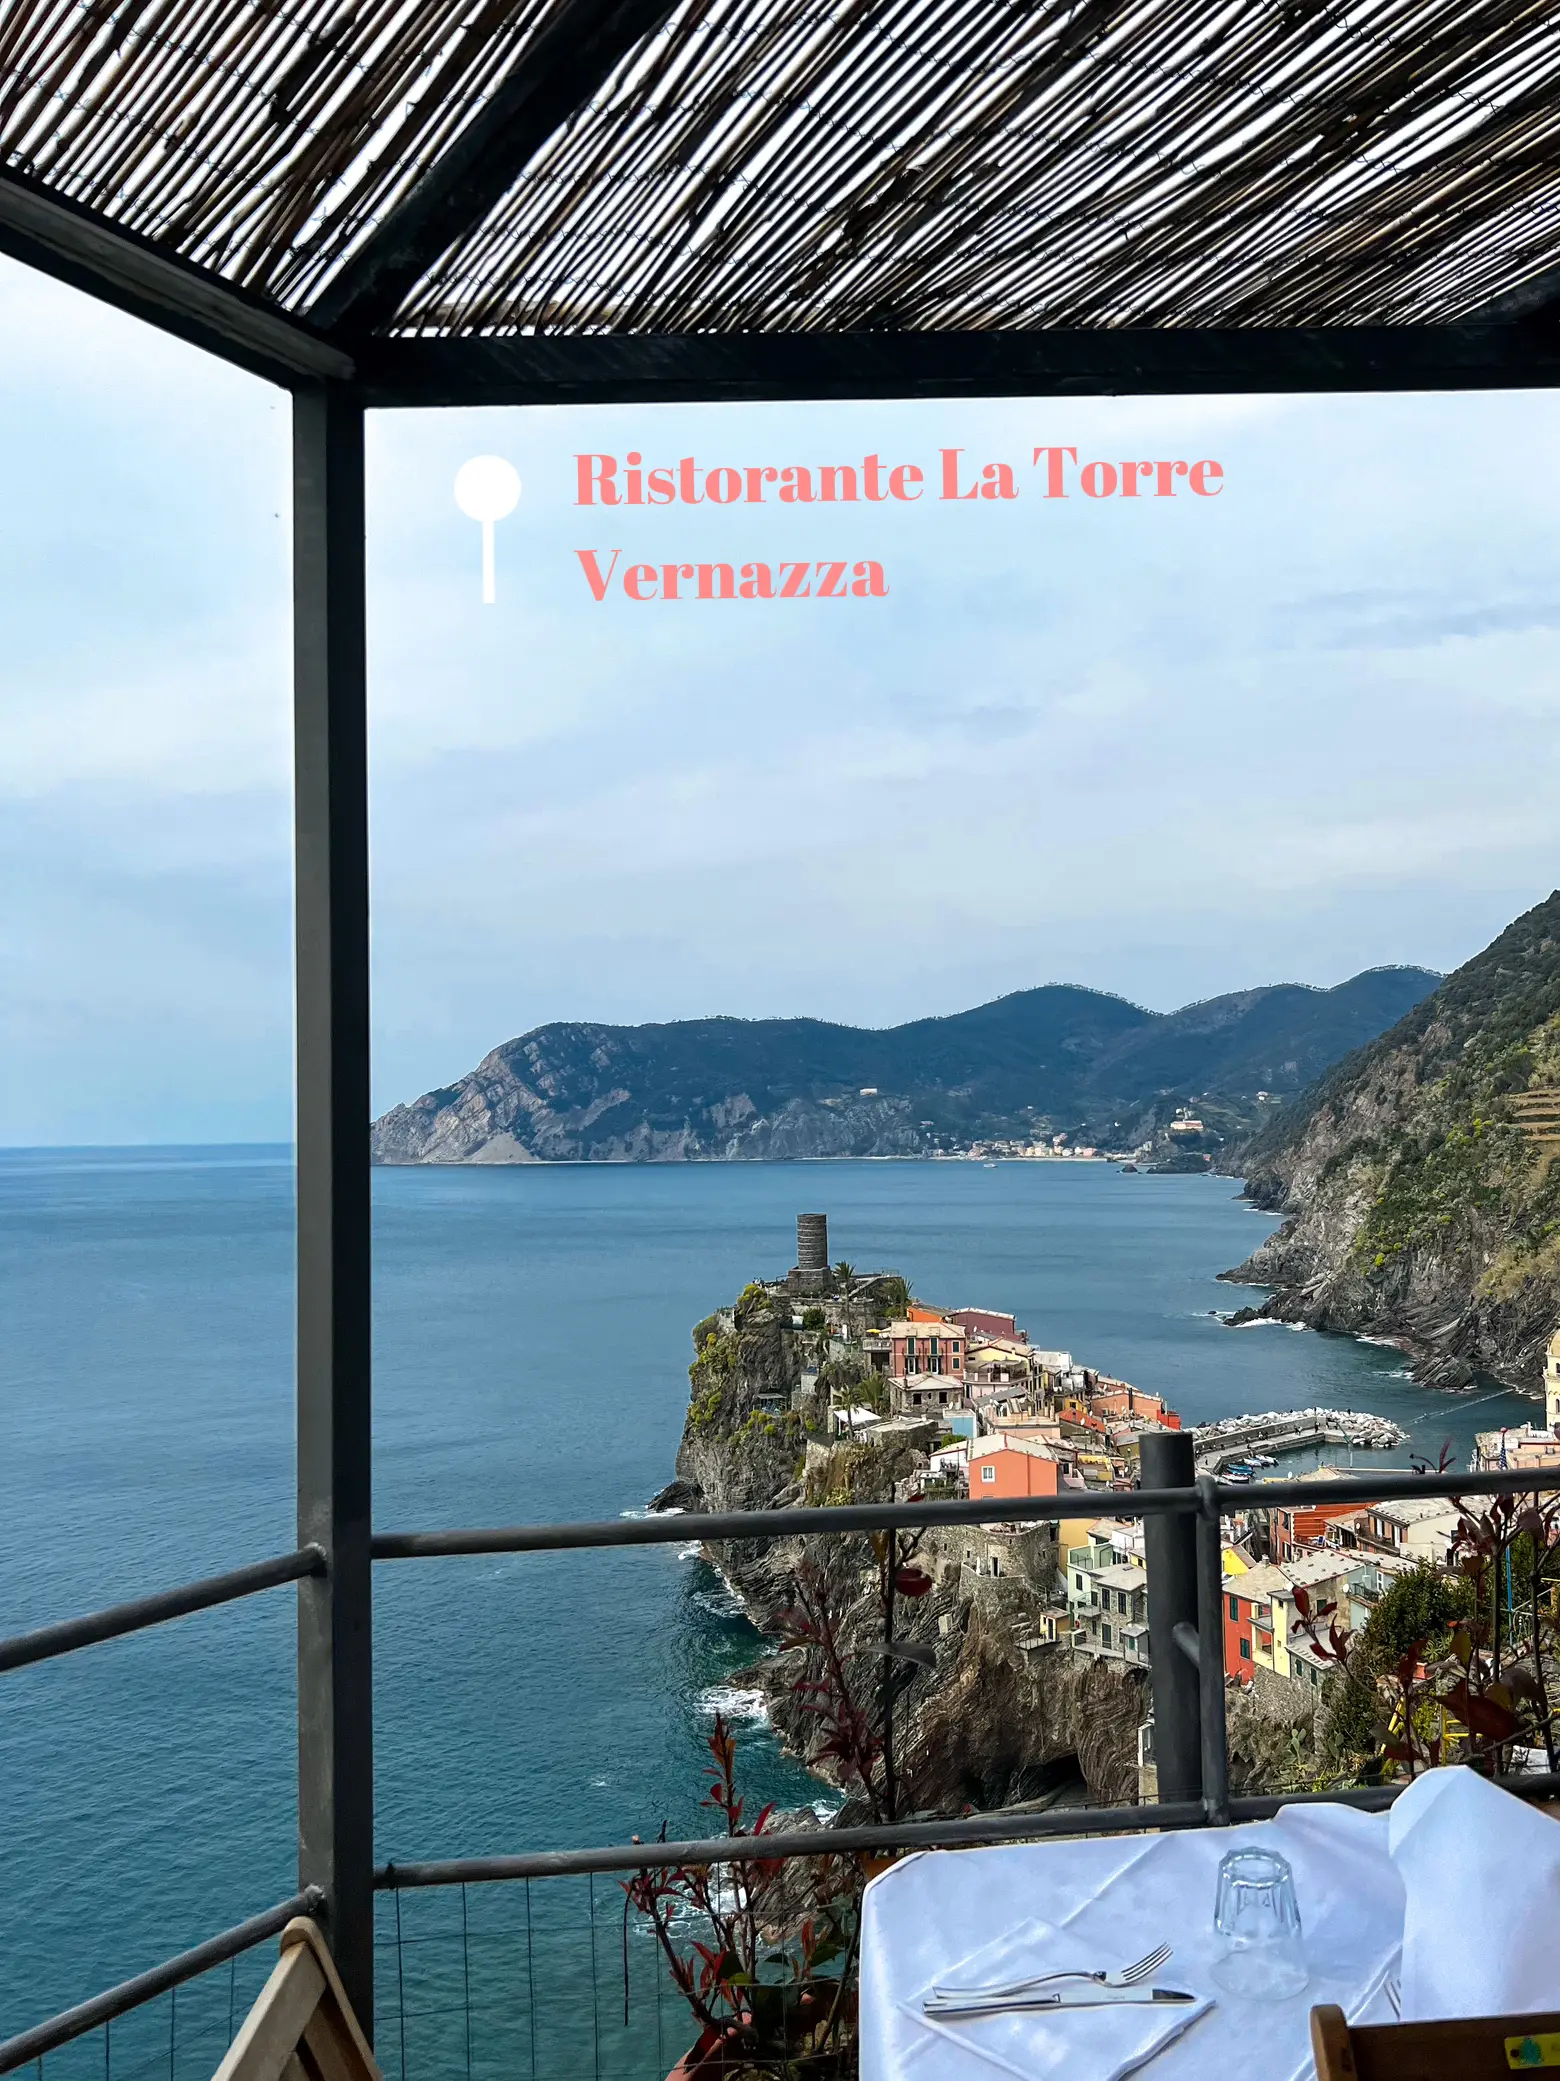  A view of the ocean with a hillside in the background. The words "Vernazza" are displayed above the view.